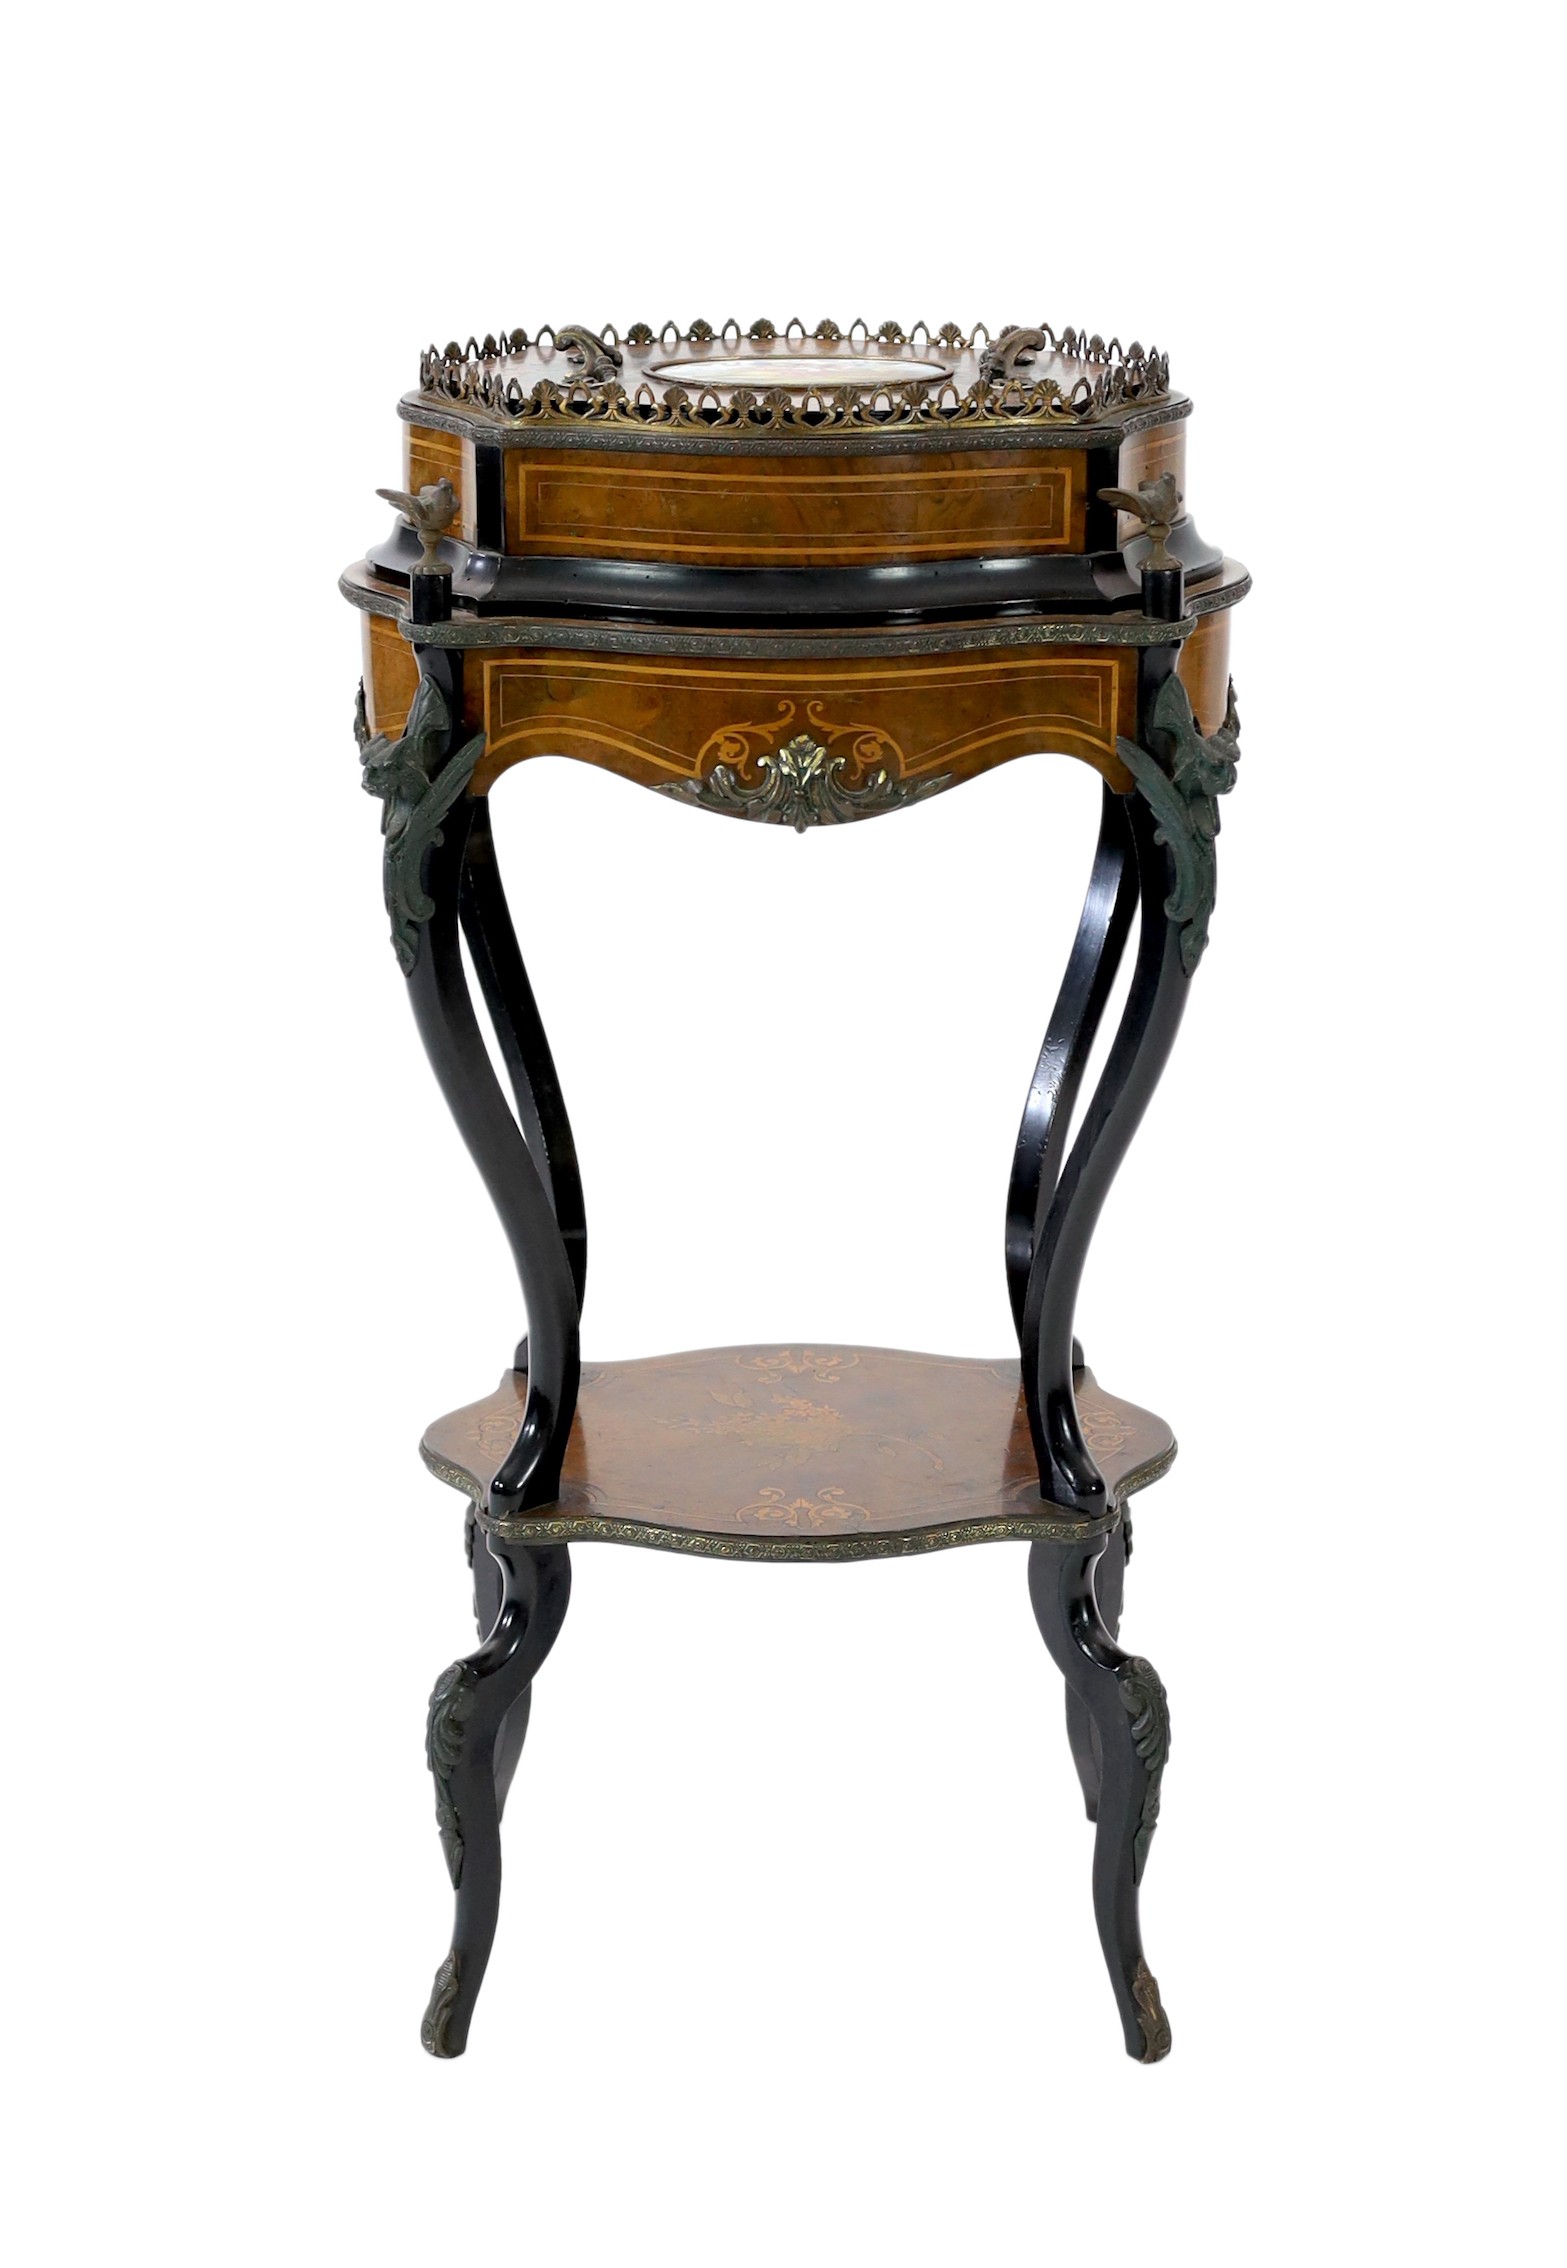 A 19th century French walnut and marquetry porcelain mounted two tier table, width 48cm, depth 35cm, height 88cm